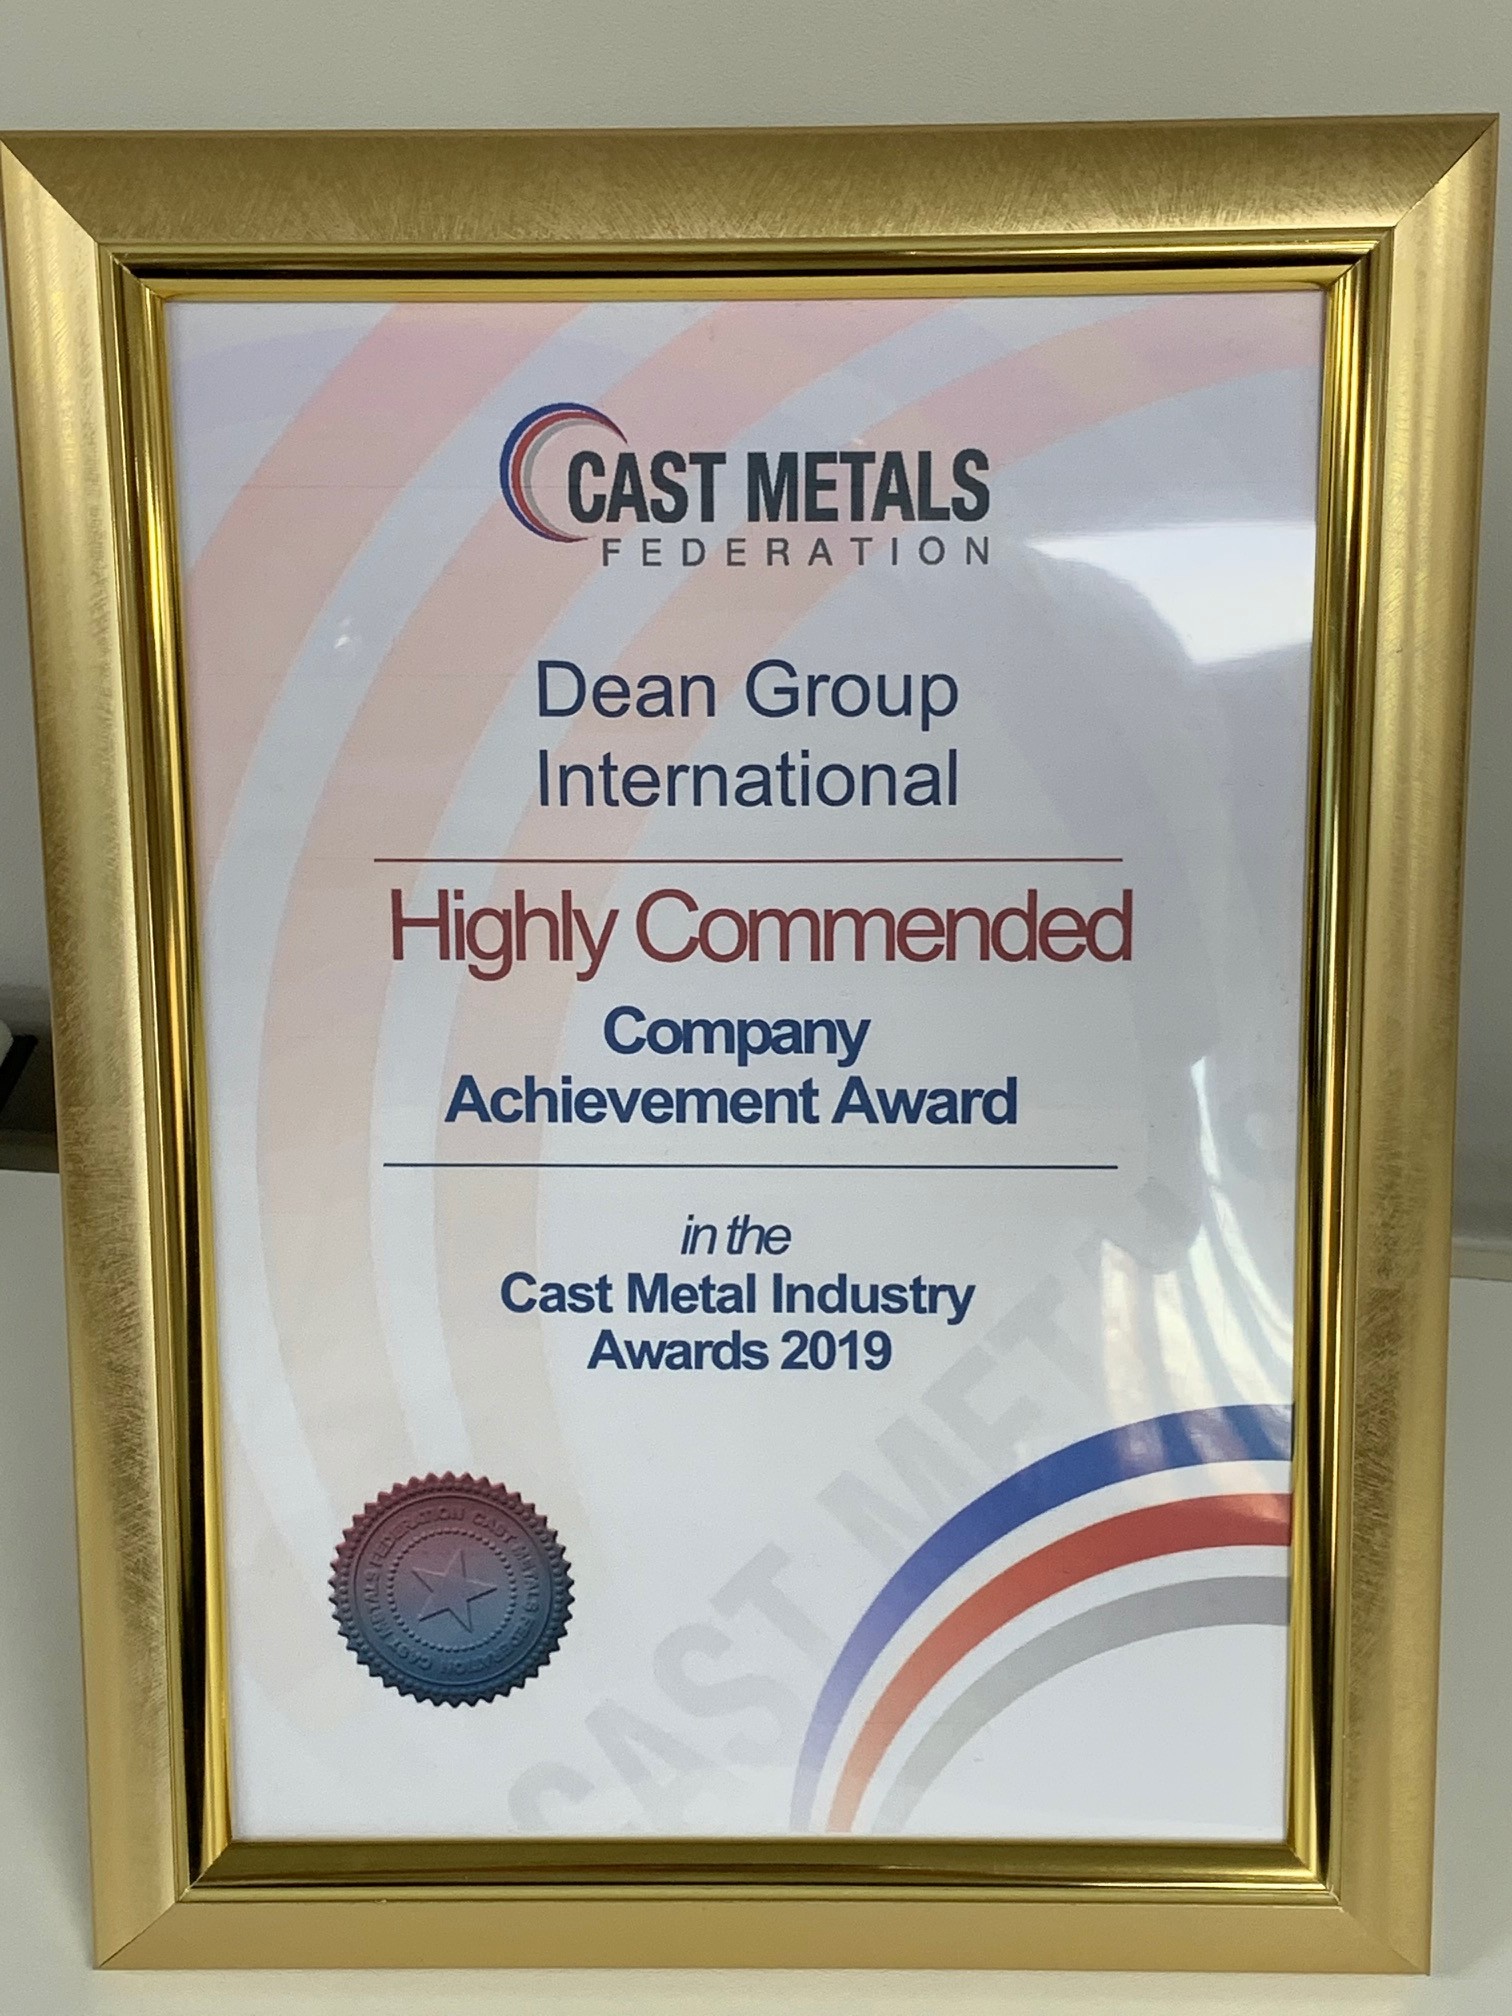 Dean Group Highly Commended Company Achievement Award